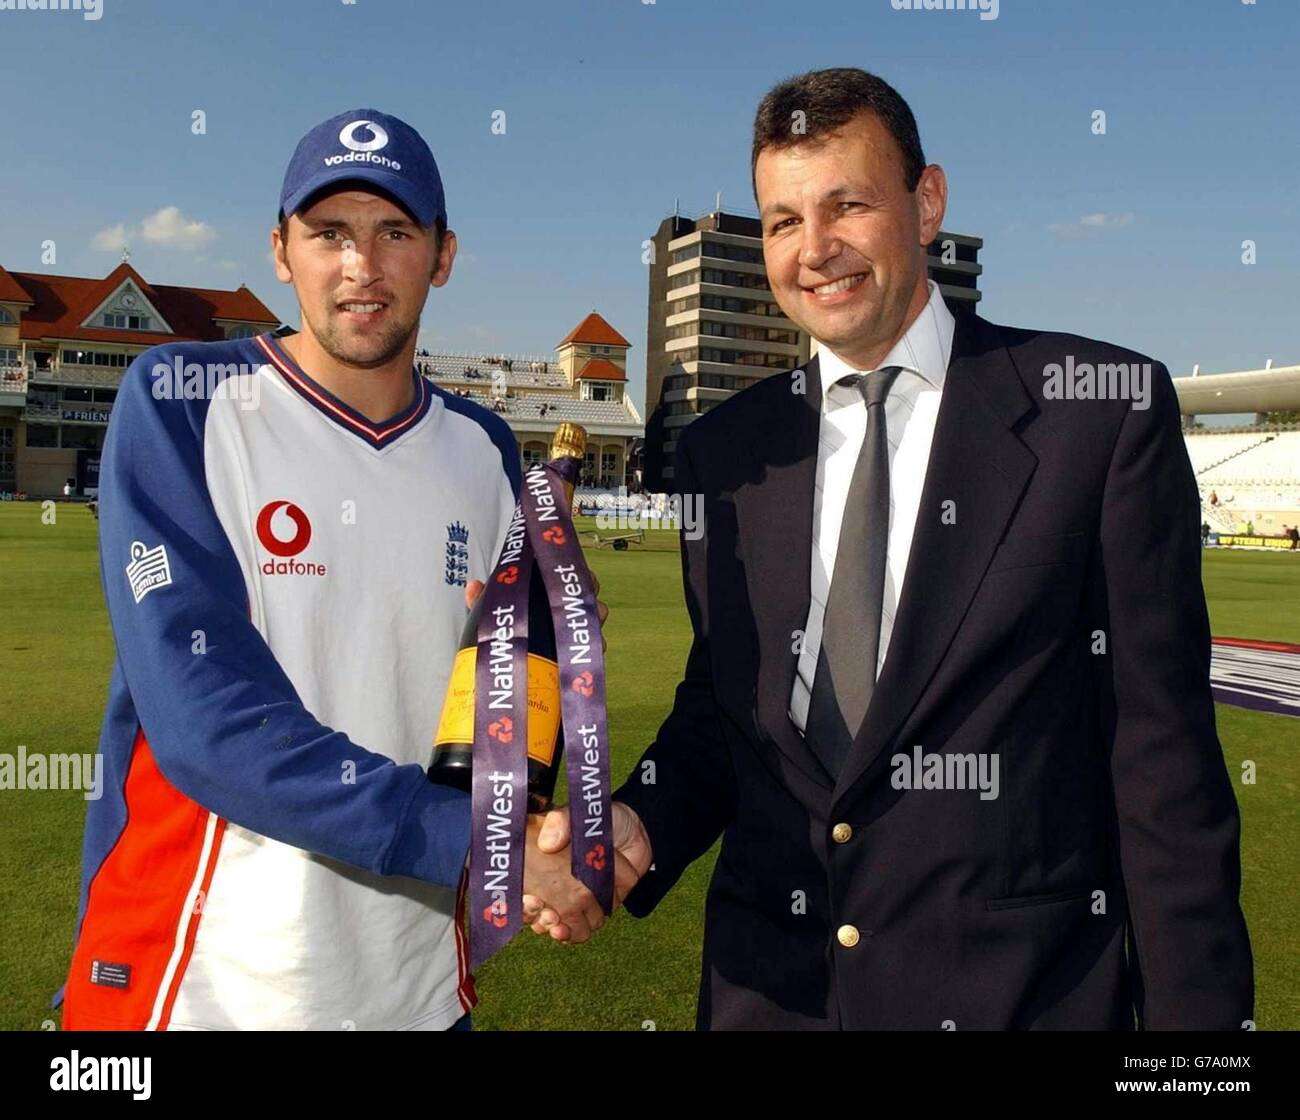 NatWest regional director Derek Brewer presents England's Stephen Harmison with champagne after his hatrick during the Natwest Challenge one day international between England and India at Trent Bridge, Nottingham. Stock Photo